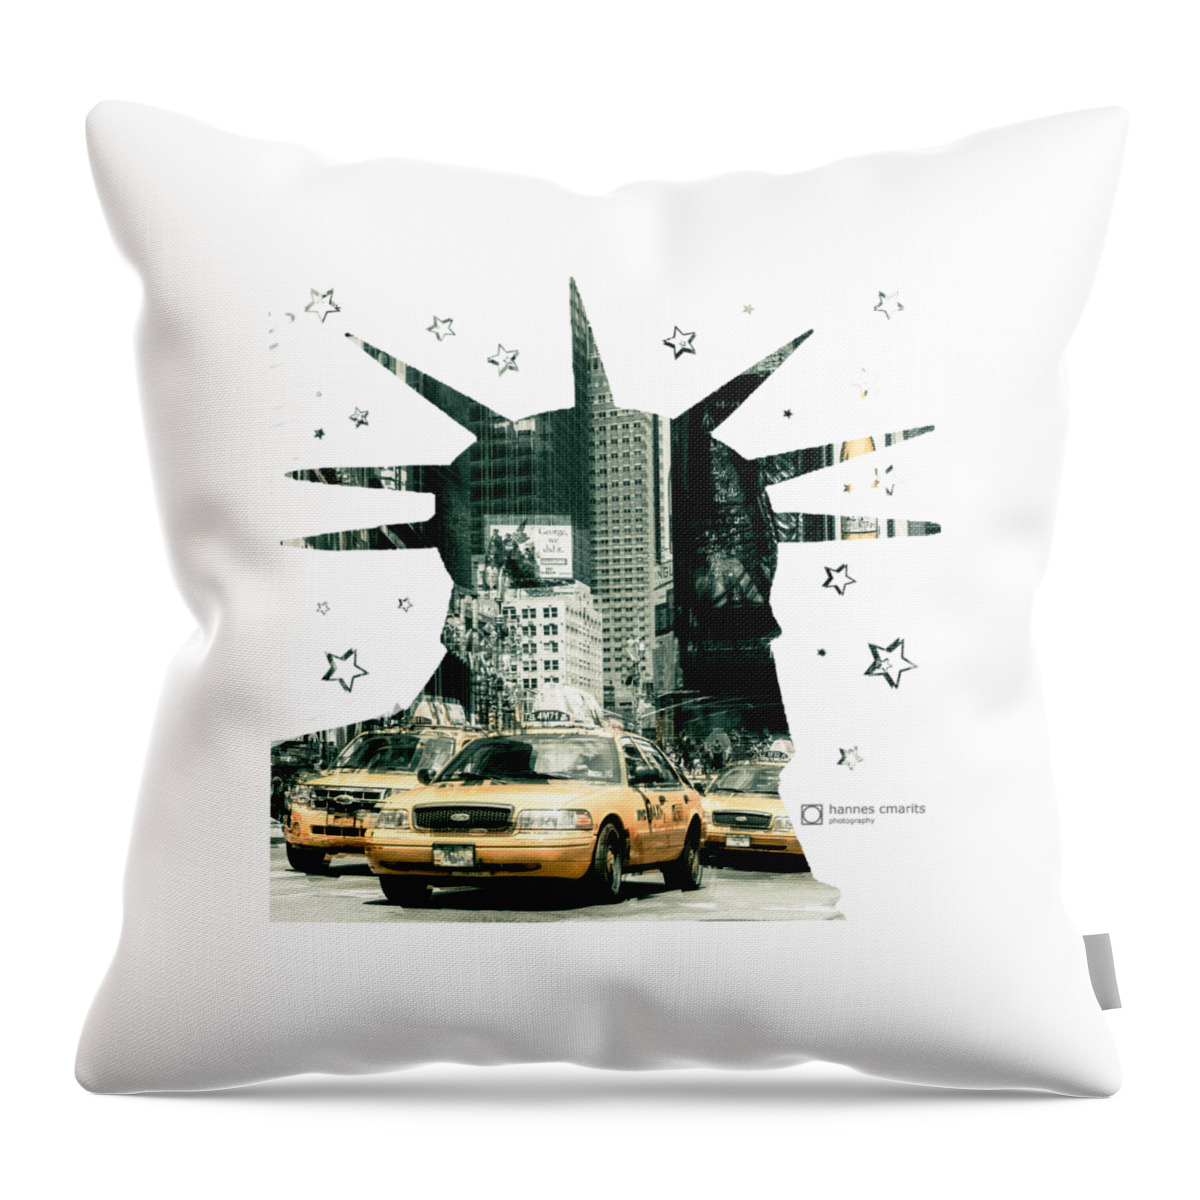 Graphical Throw Pillow featuring the photograph Lady Liberty And The Yellow Cabs by Hannes Cmarits